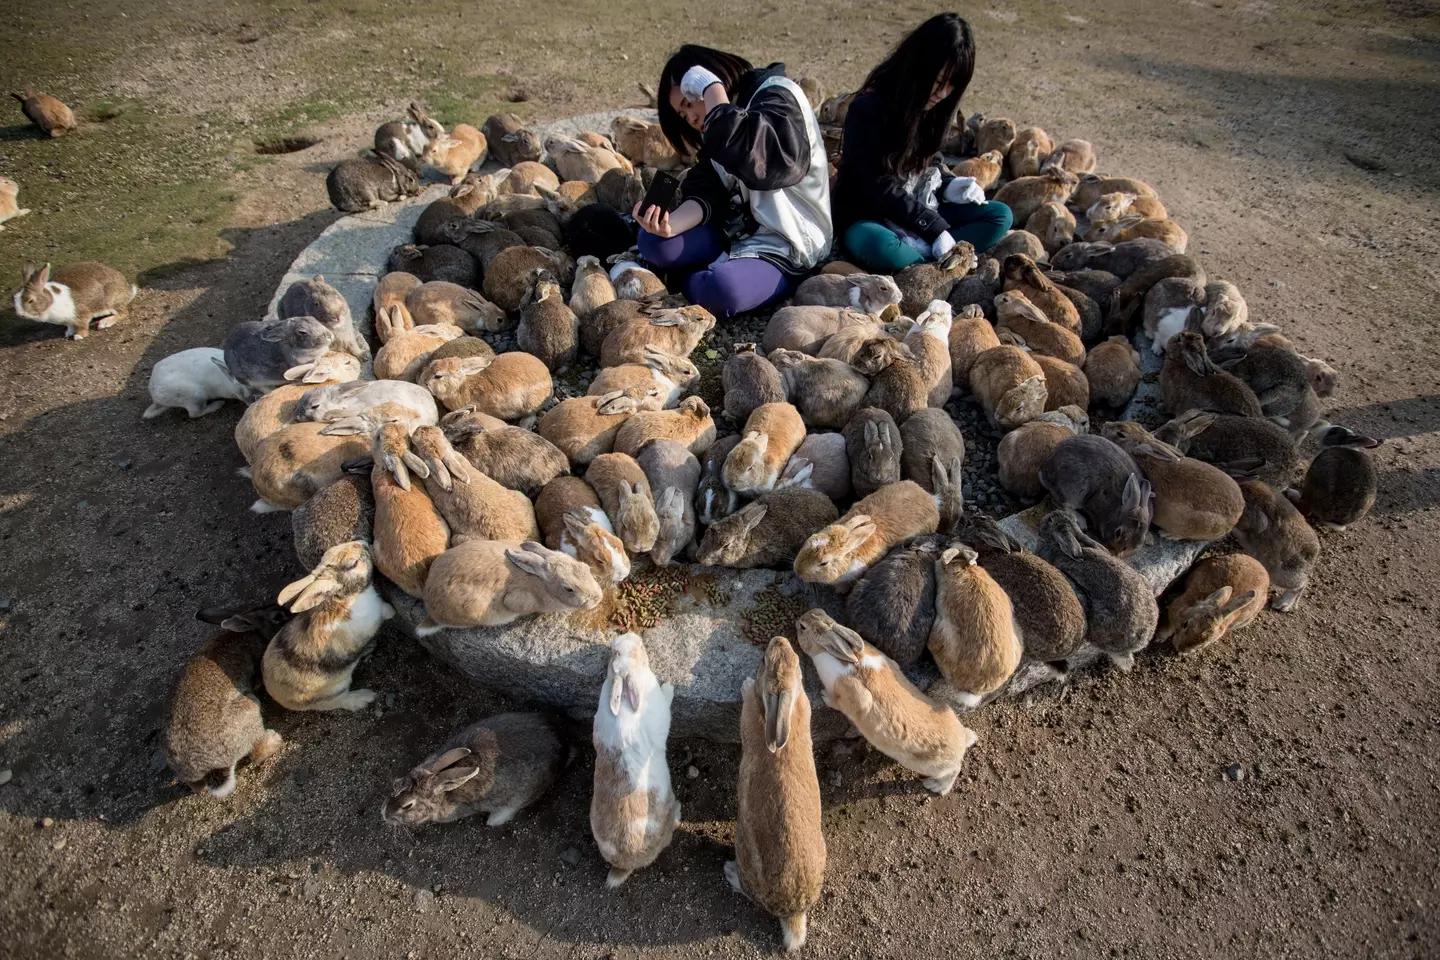 Ōkunoshima is now better known as Rabbit Island due to its furry inhabitants.